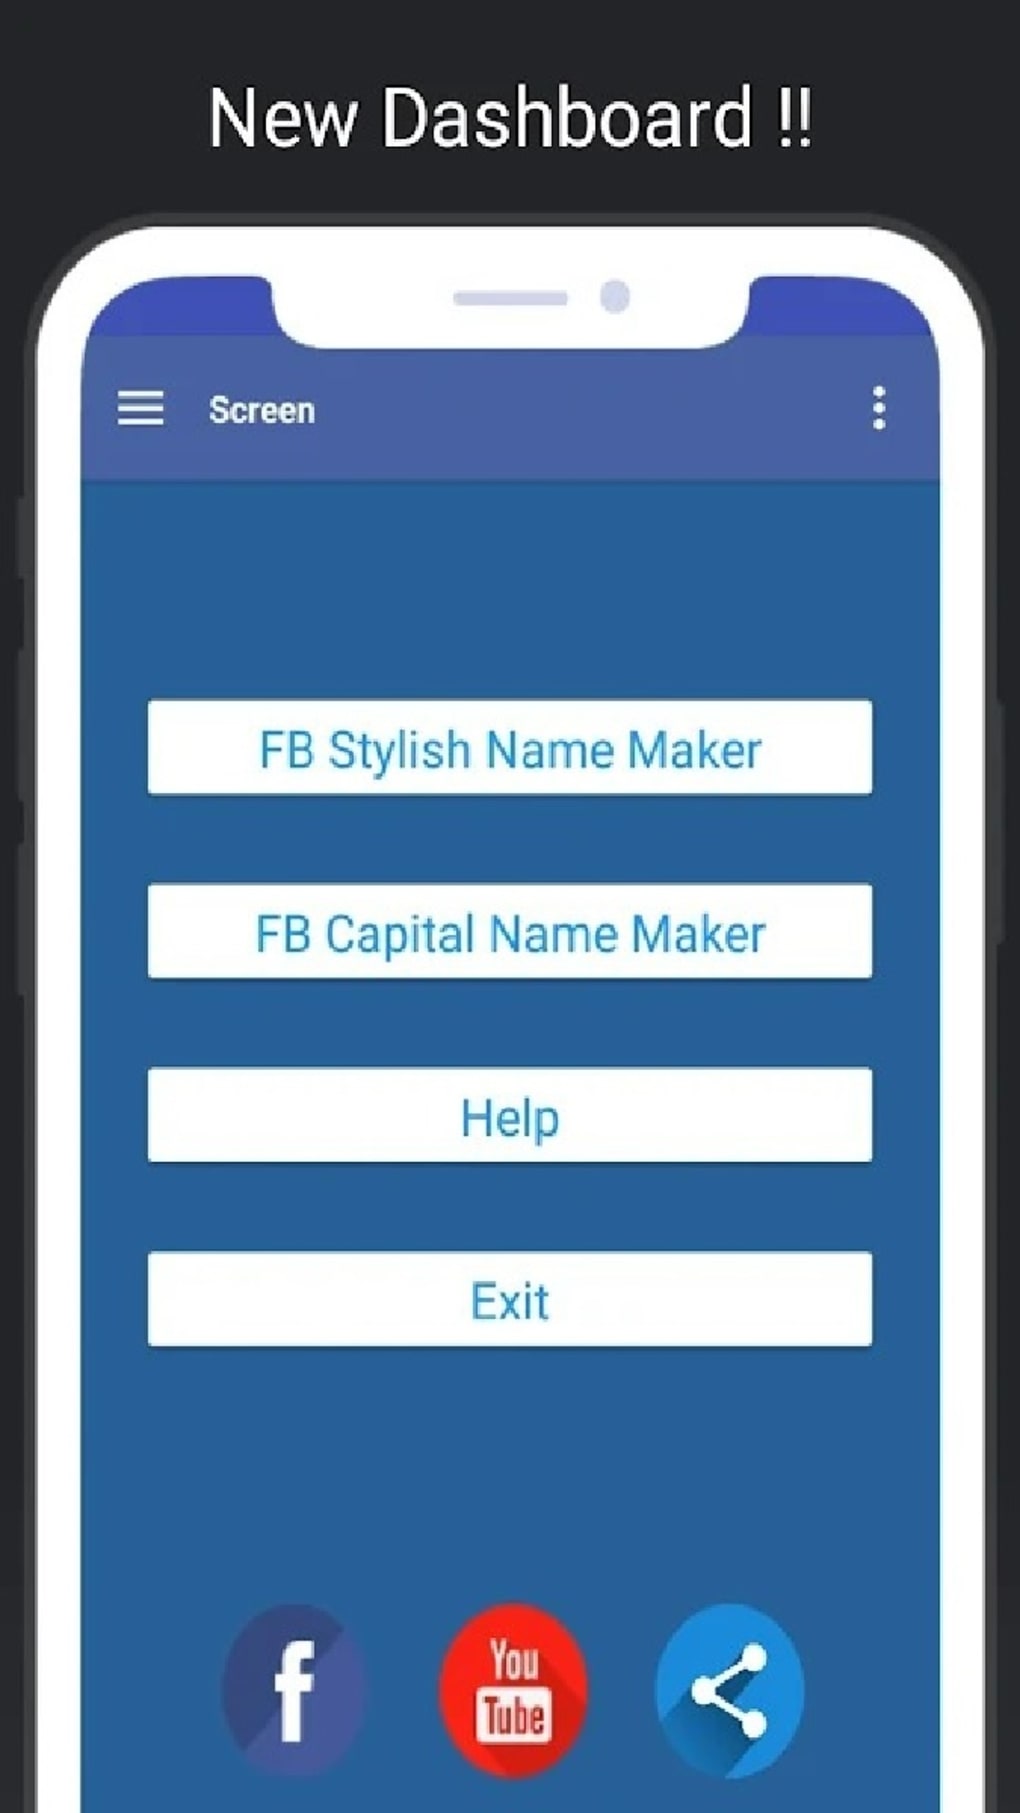 Install This Fb Stylish Name Maker App And Make Your FB Name With Stylish  Font, By TekOnly.com